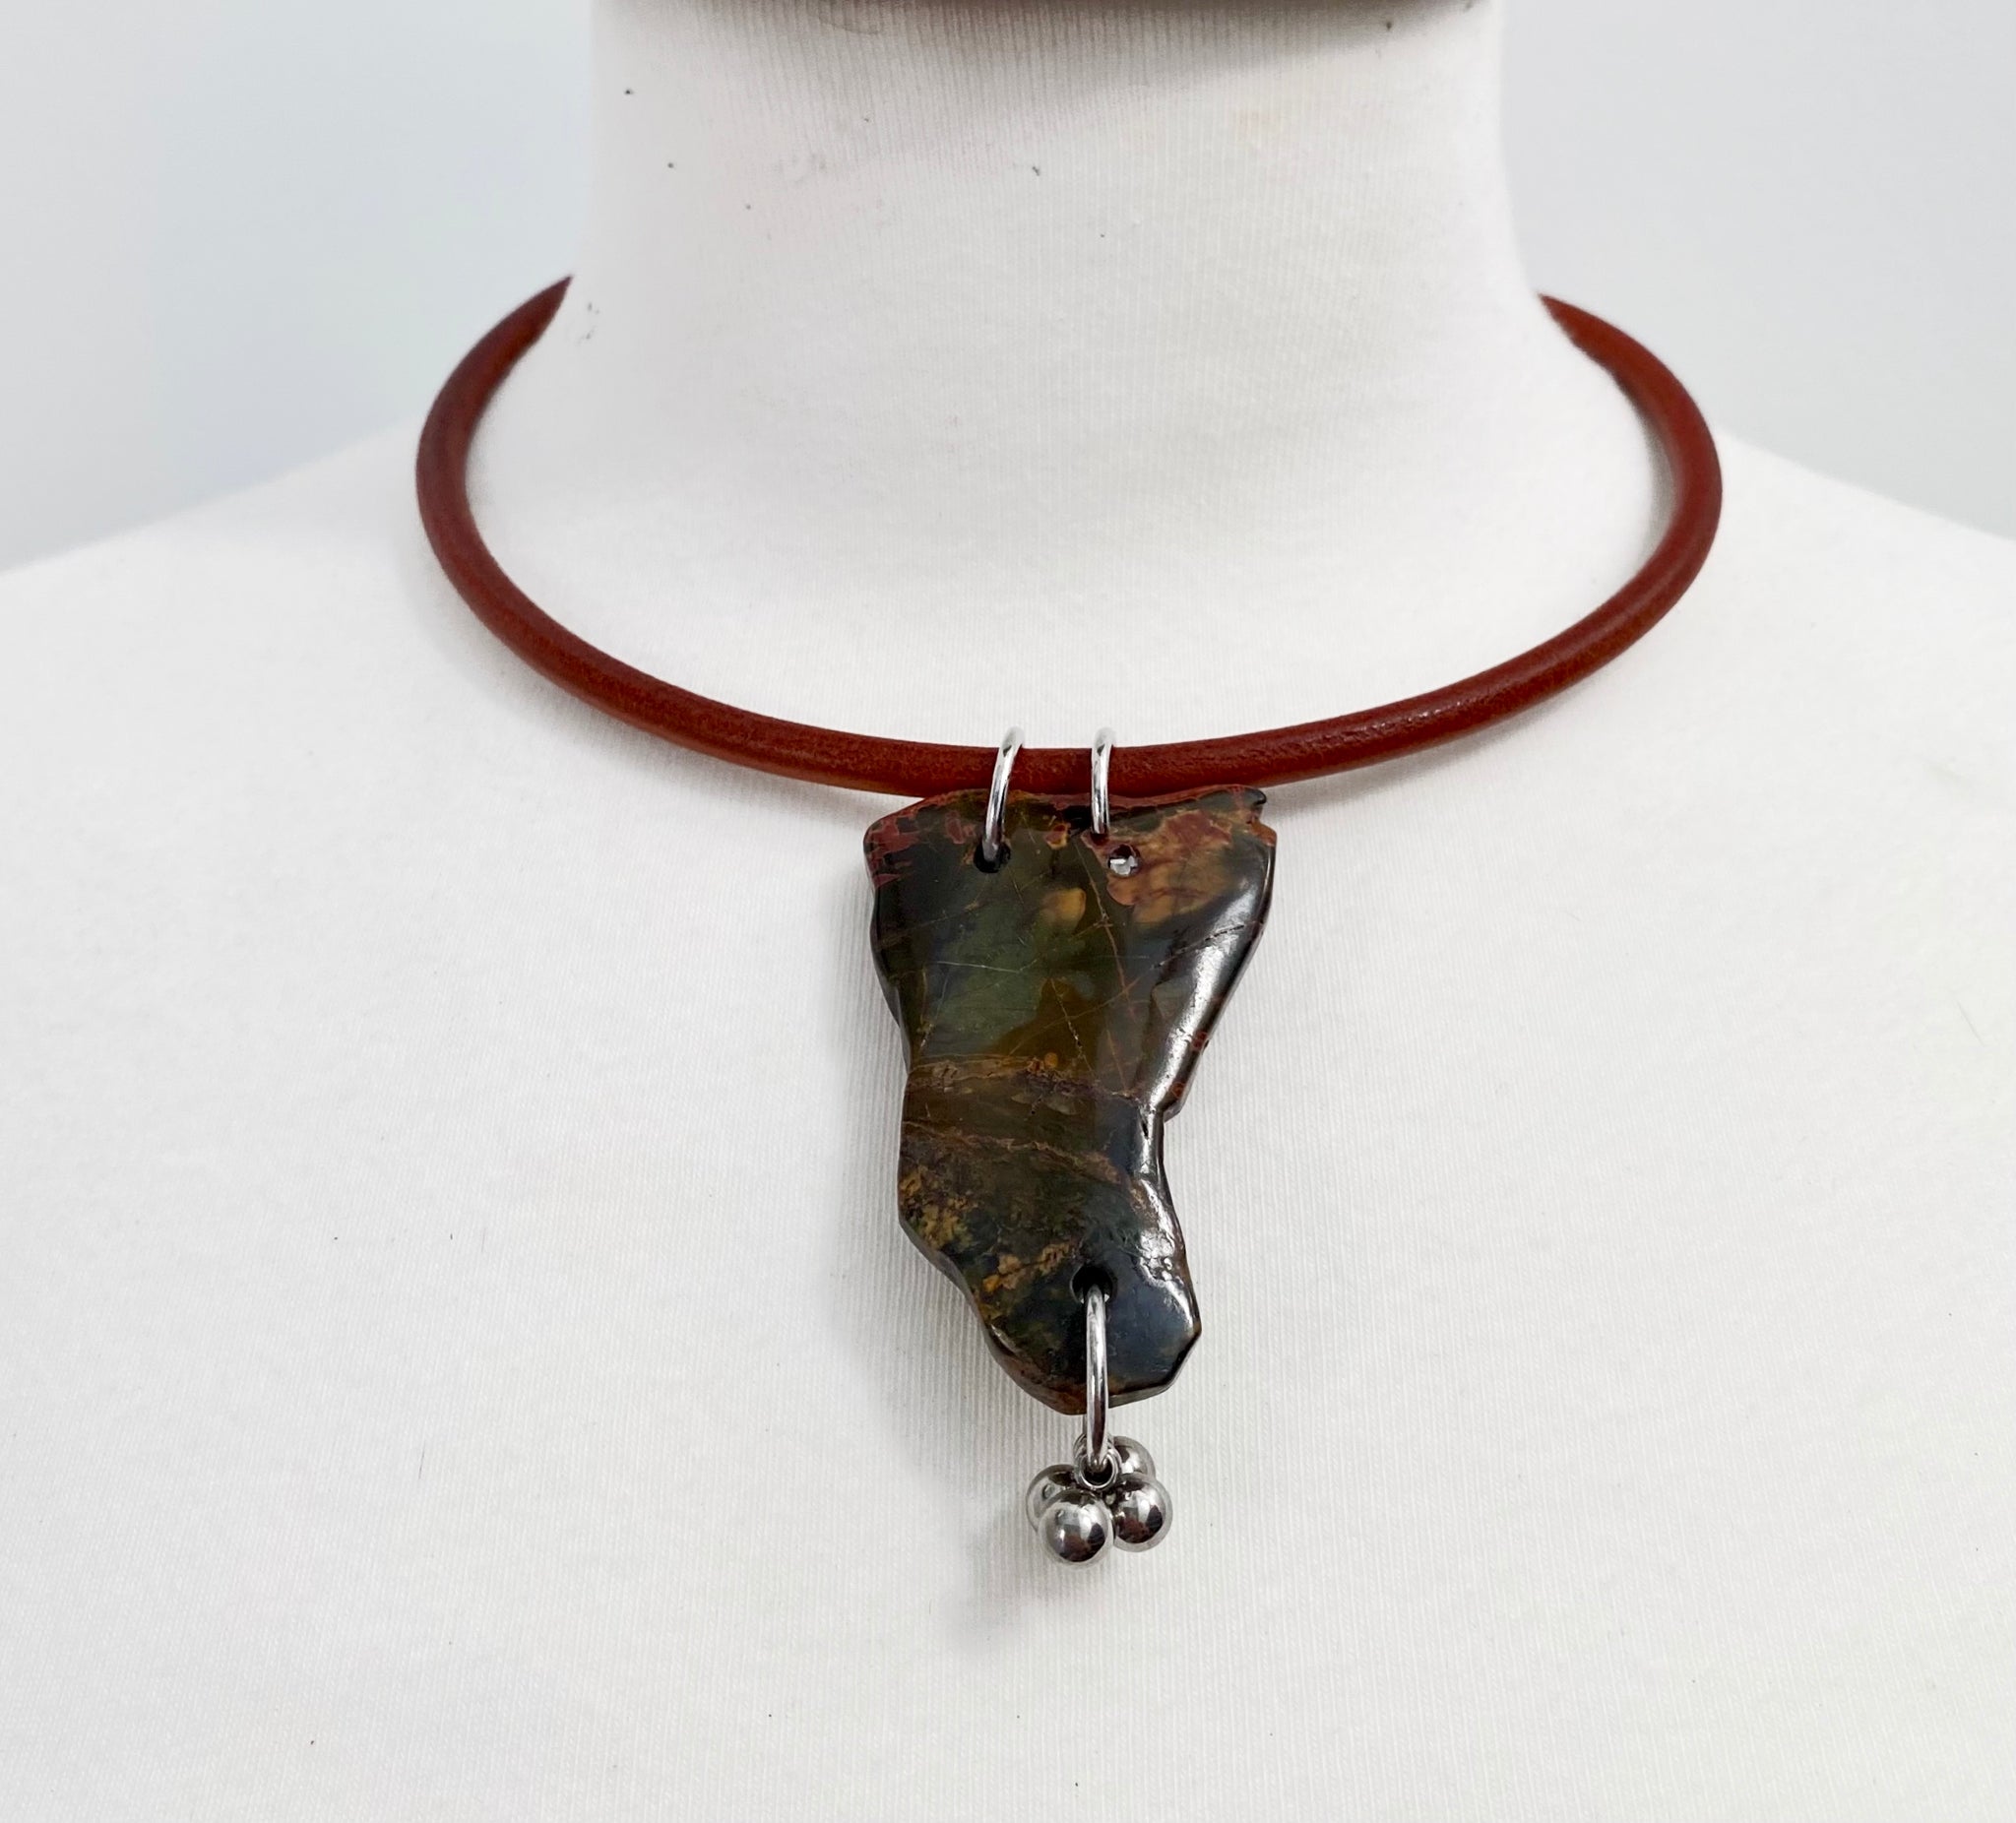 5 MM ROUND LEATHER NECKLACE WITH POLISHED STONE PENDENT AND STAINLESS STEEL BEADS. by nyet jewelry